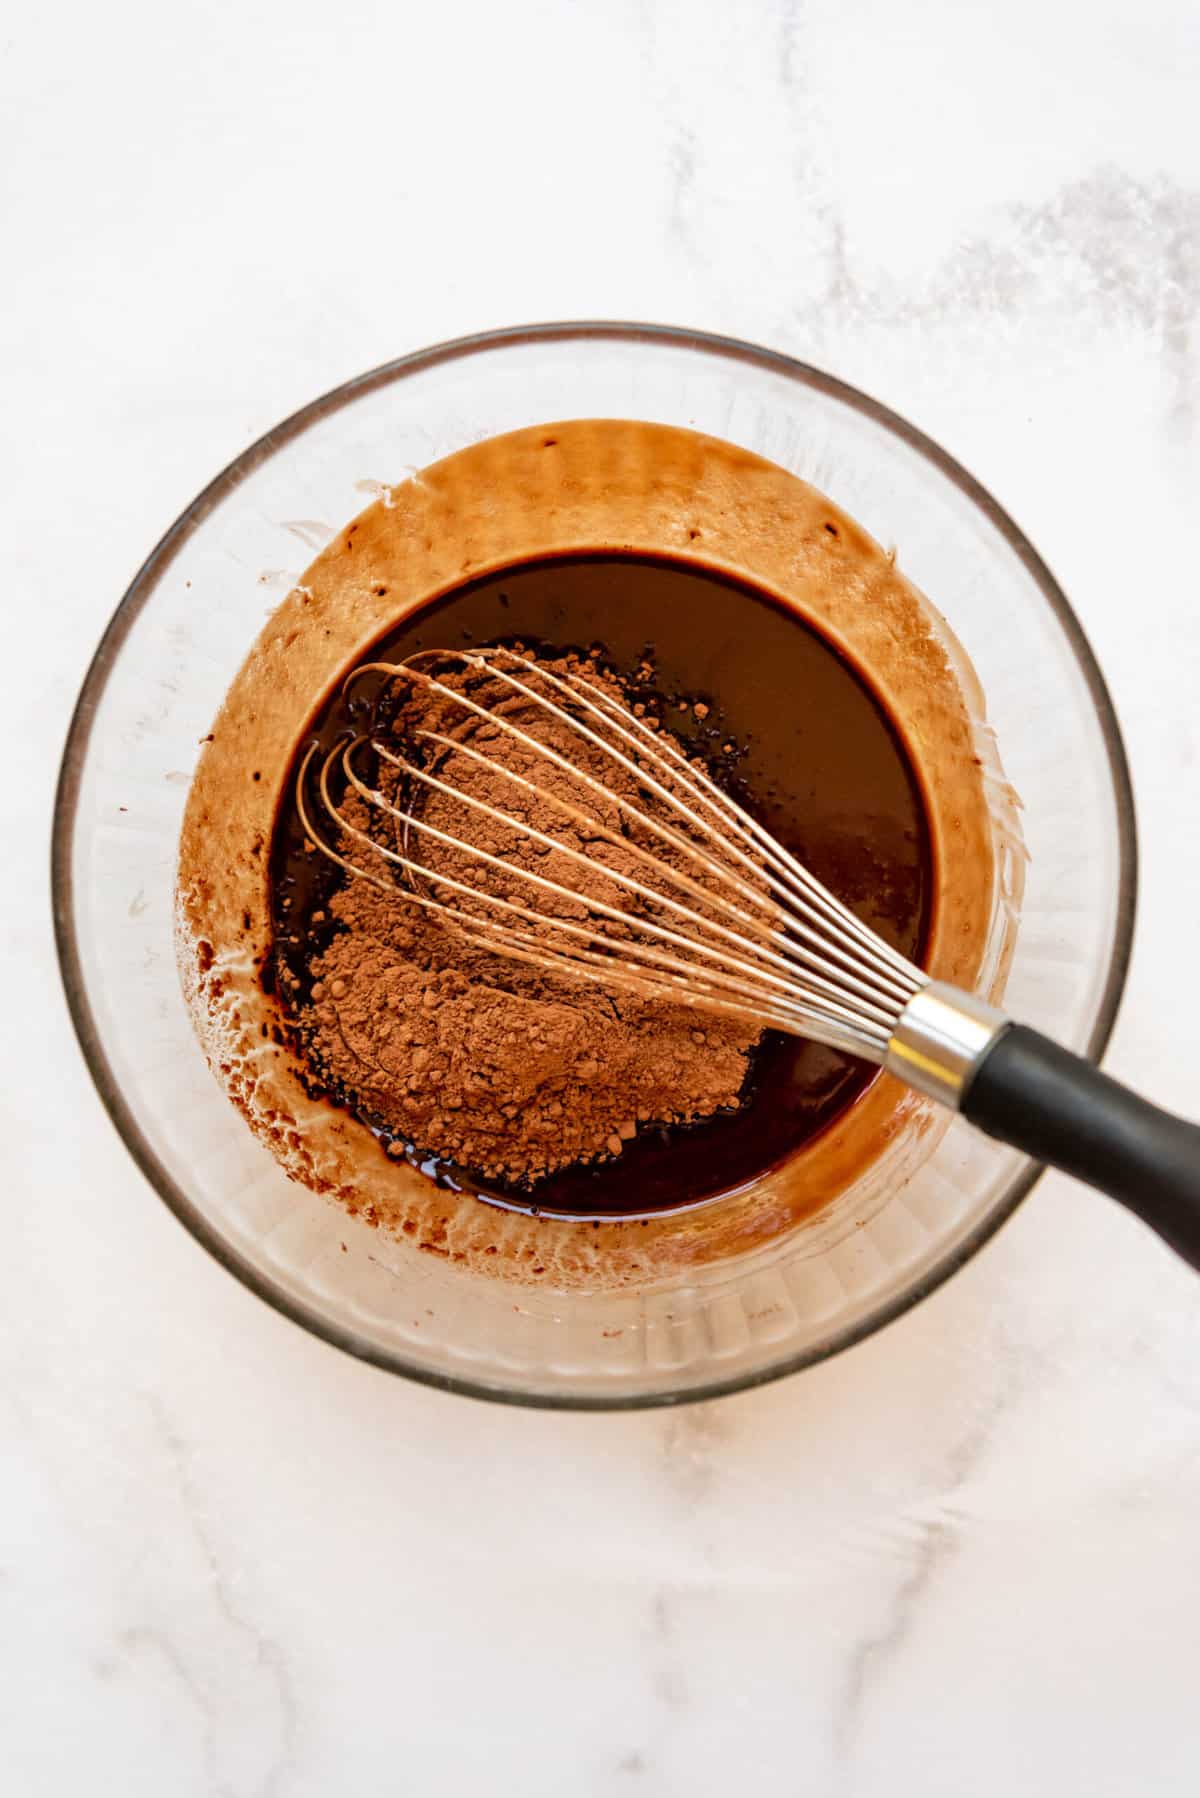 Whisking cocoa powder into melted butter and chocolate.